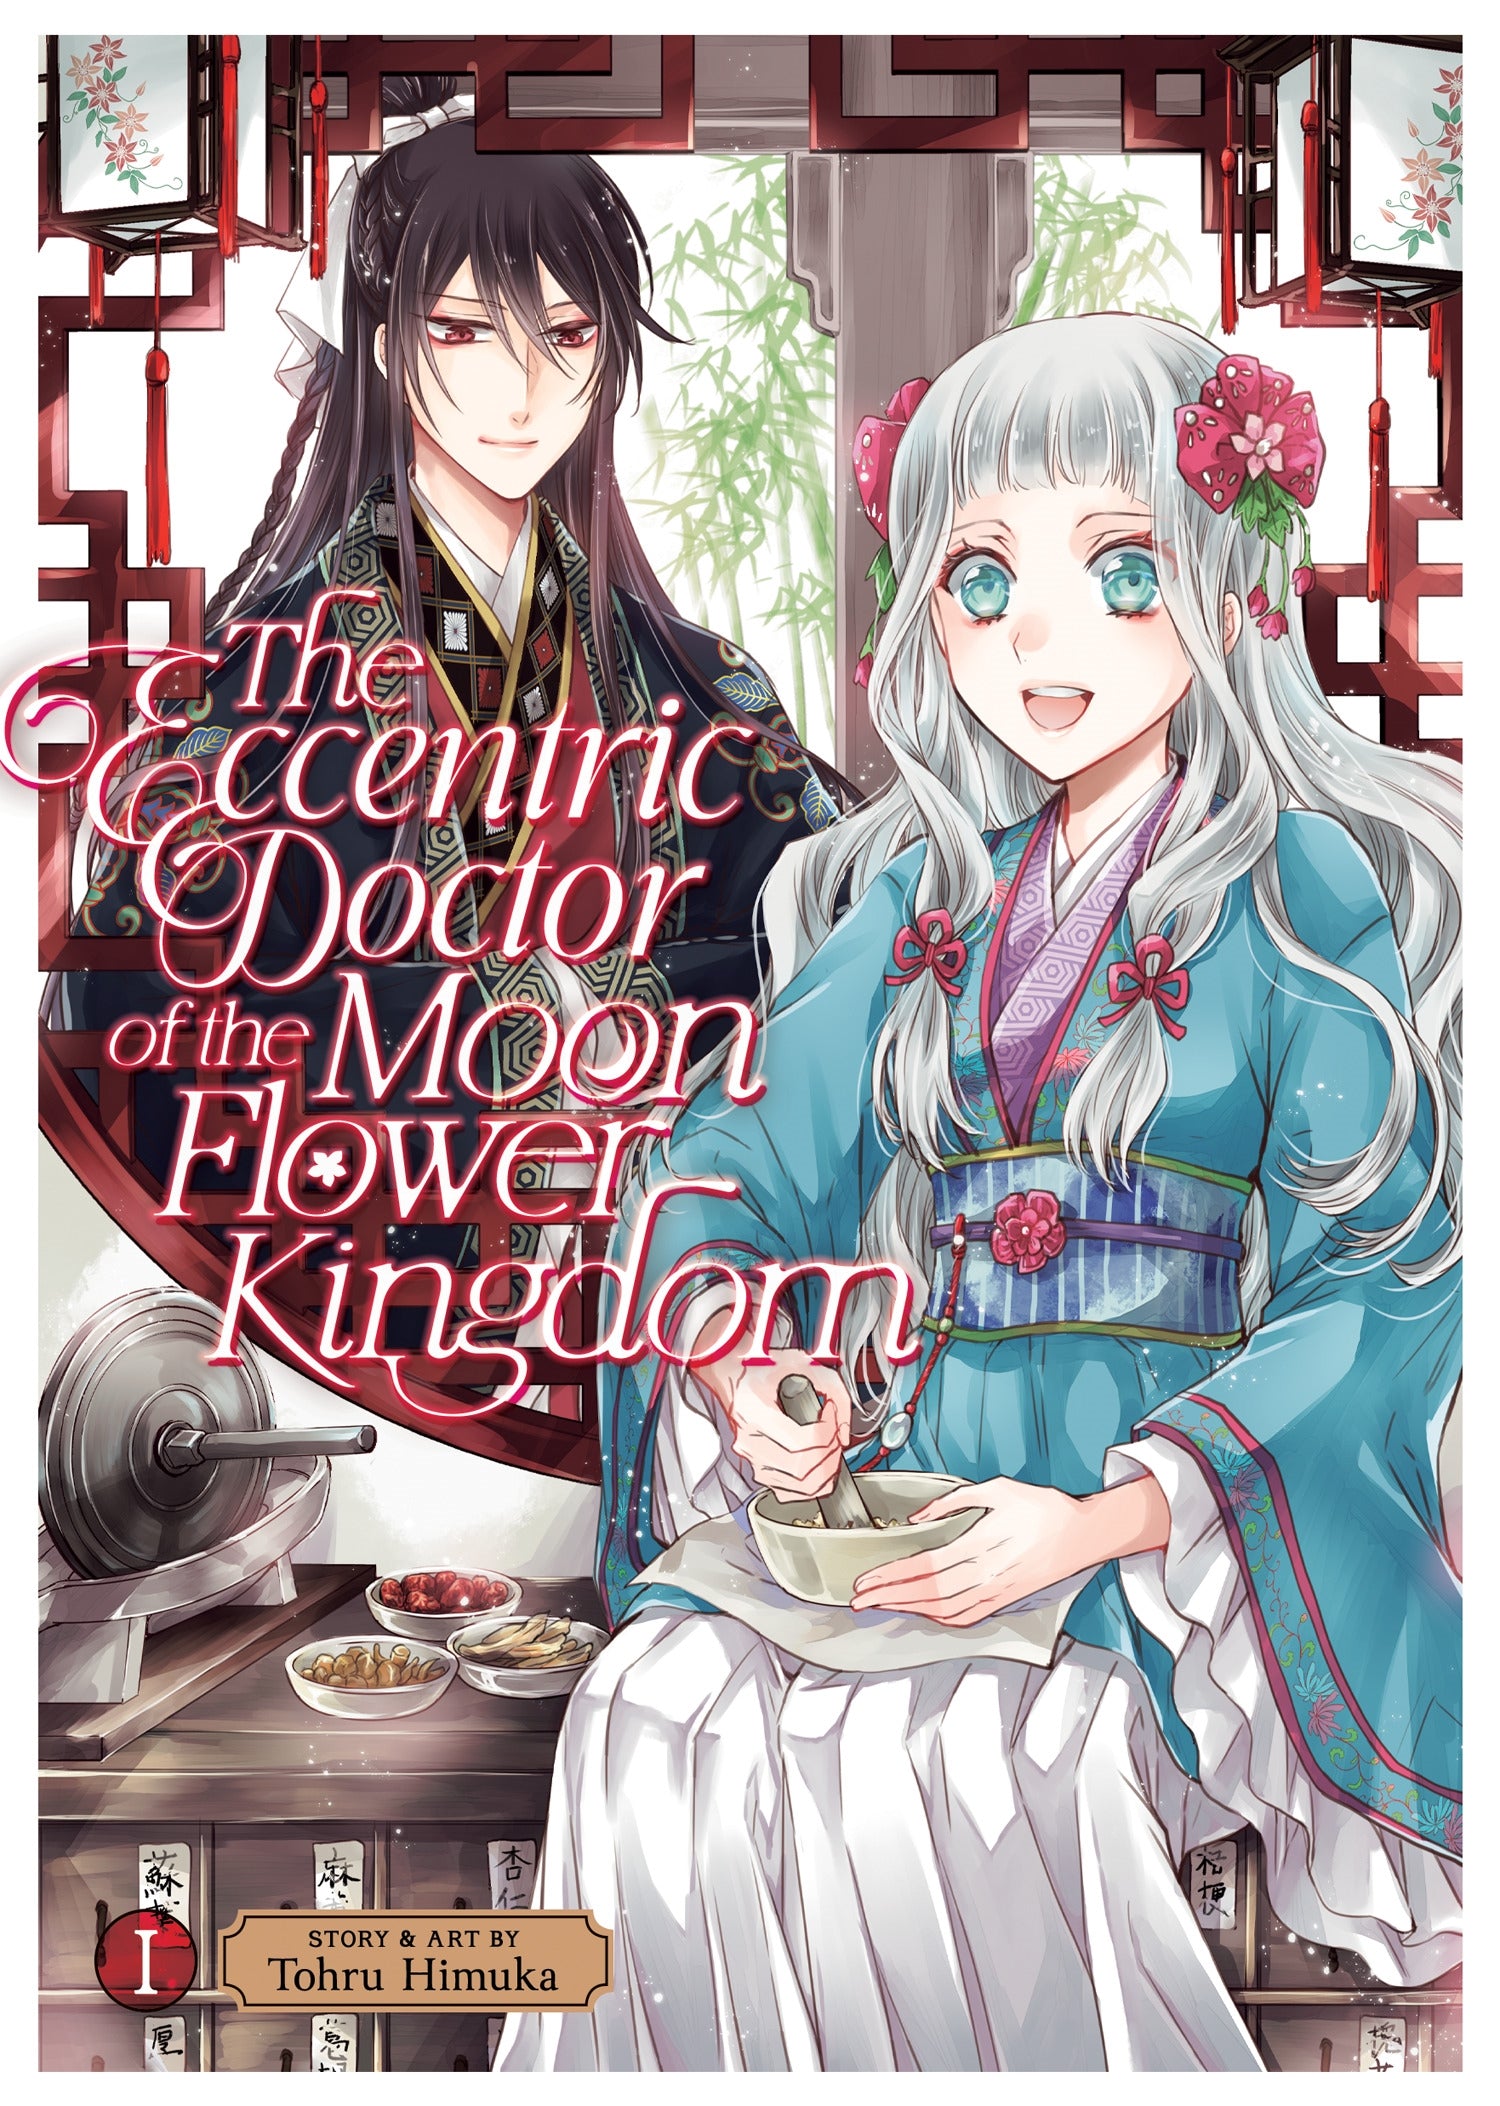 The Eccentric Doctor of the Moon Flower Kingdom, Vol. 1